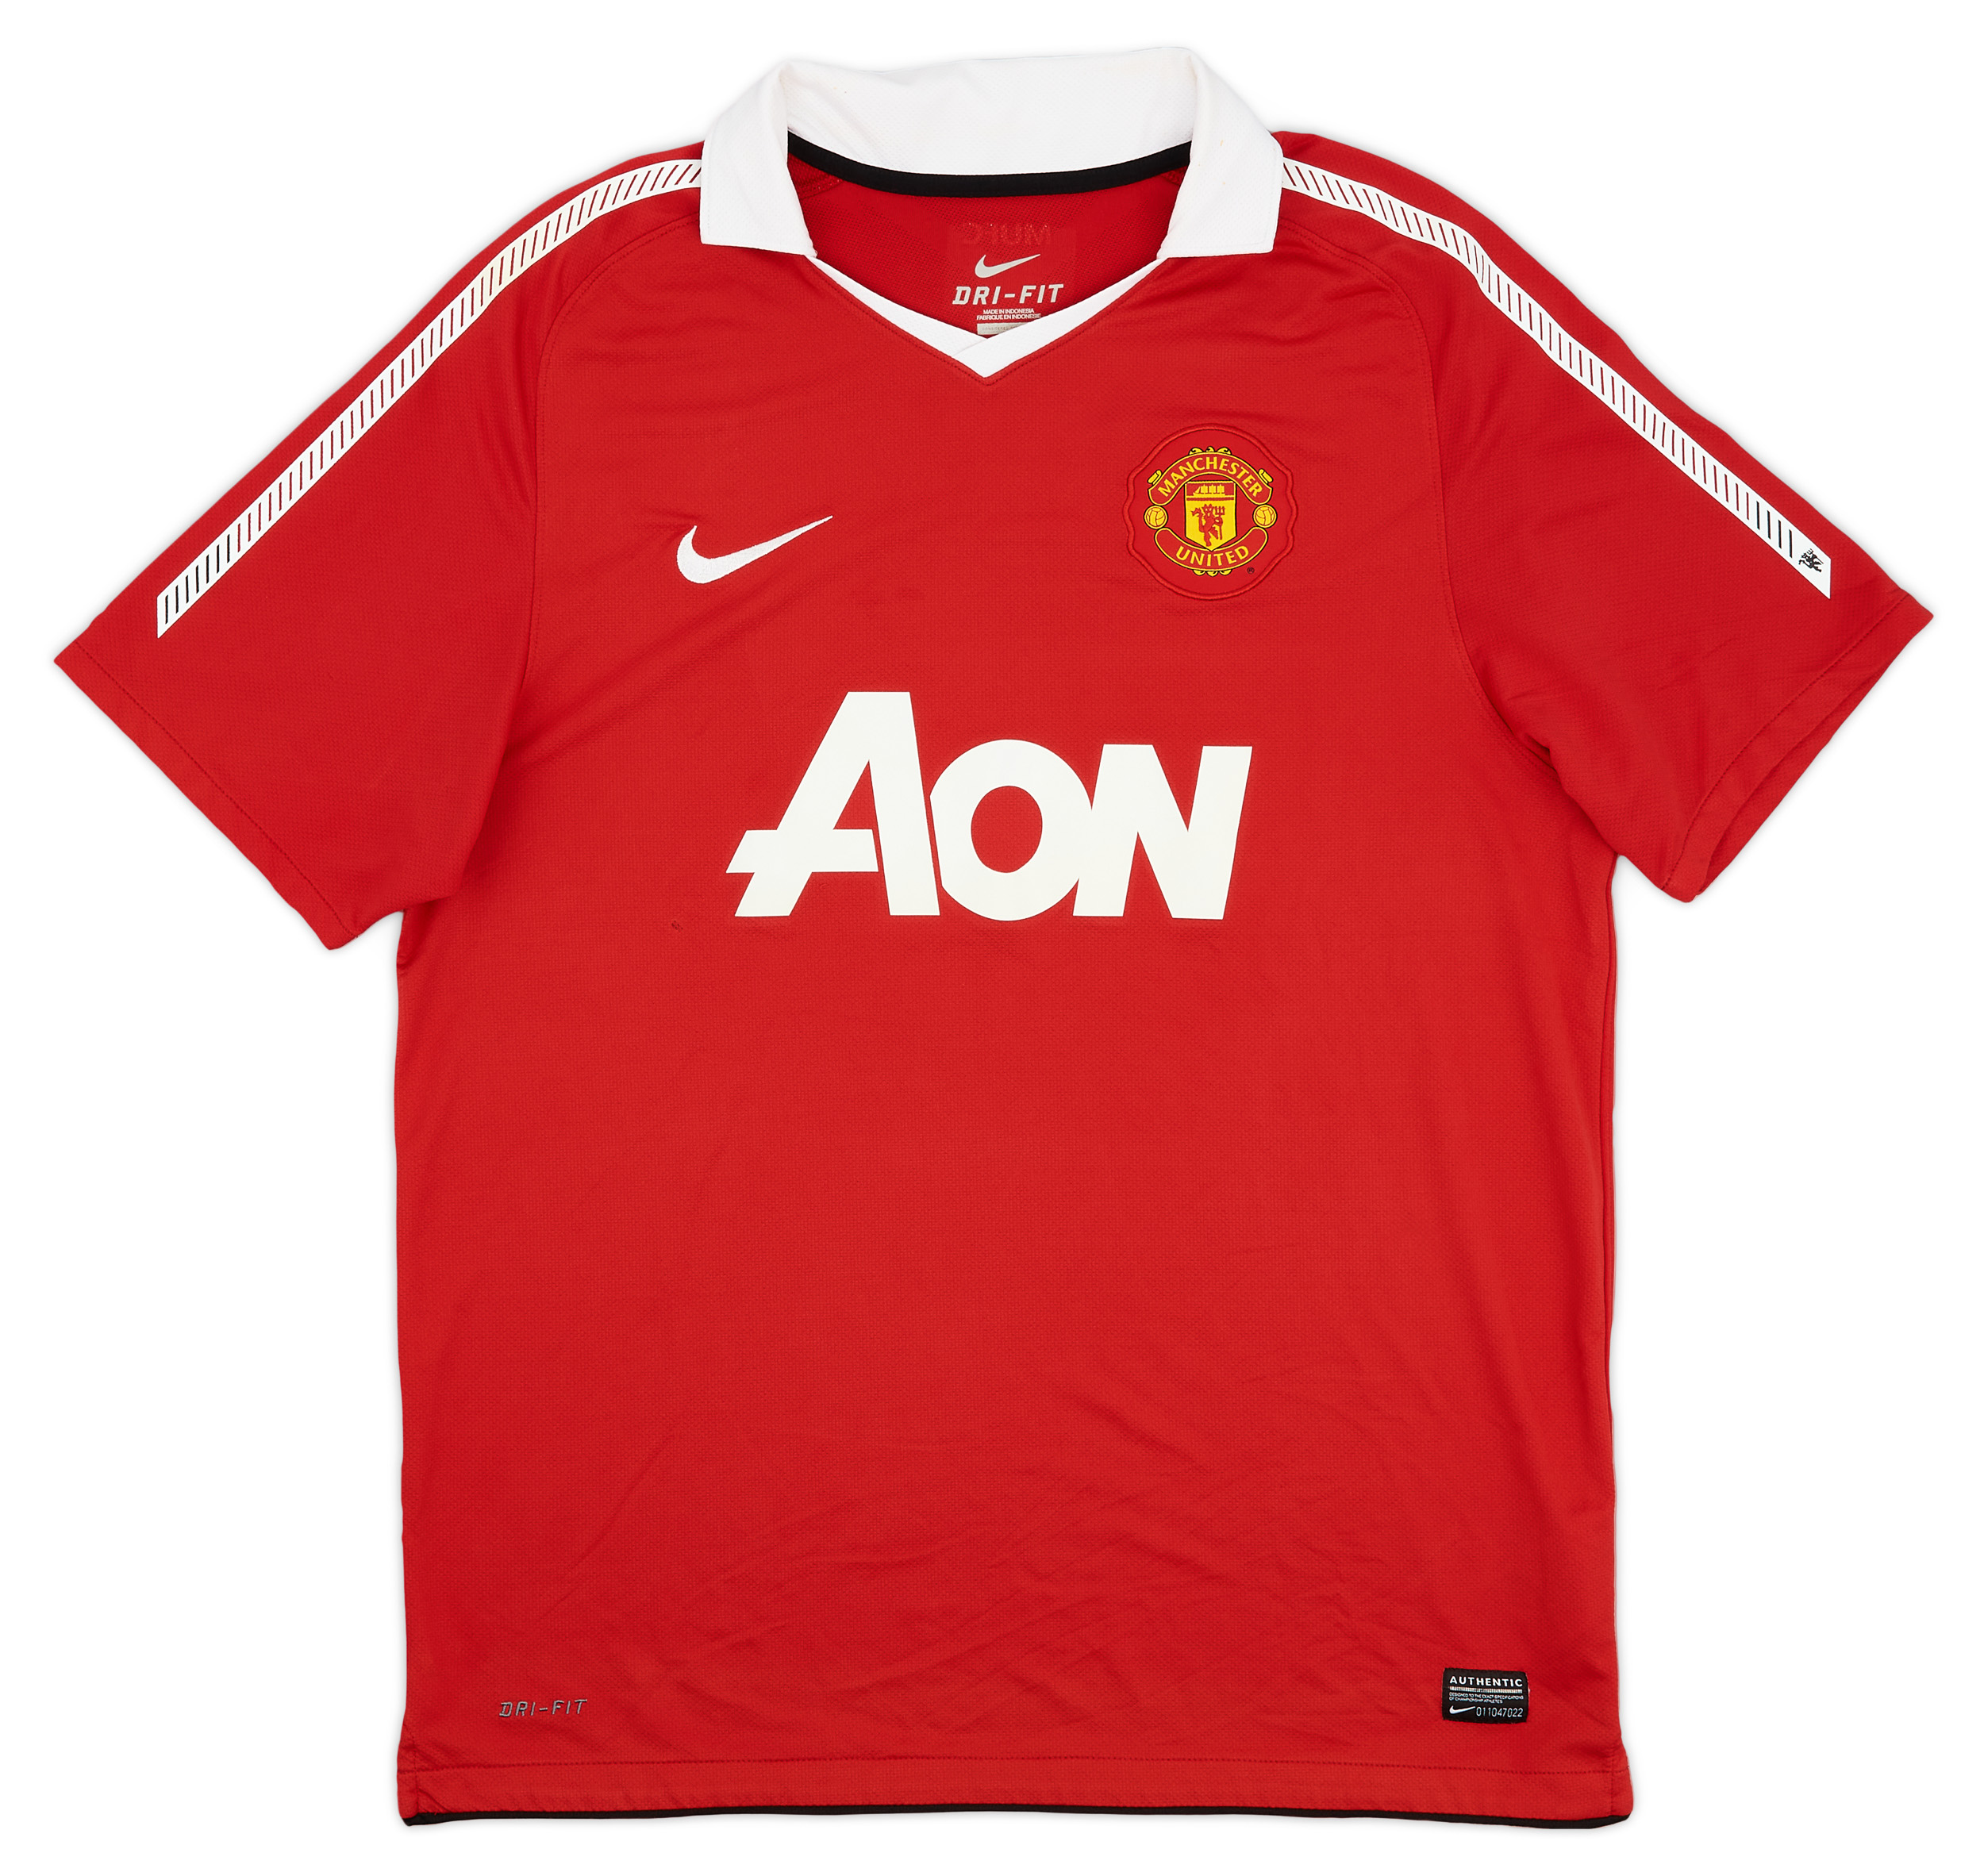 2010-11 Manchester United Home Shirt - Excellent 8/10 - ()